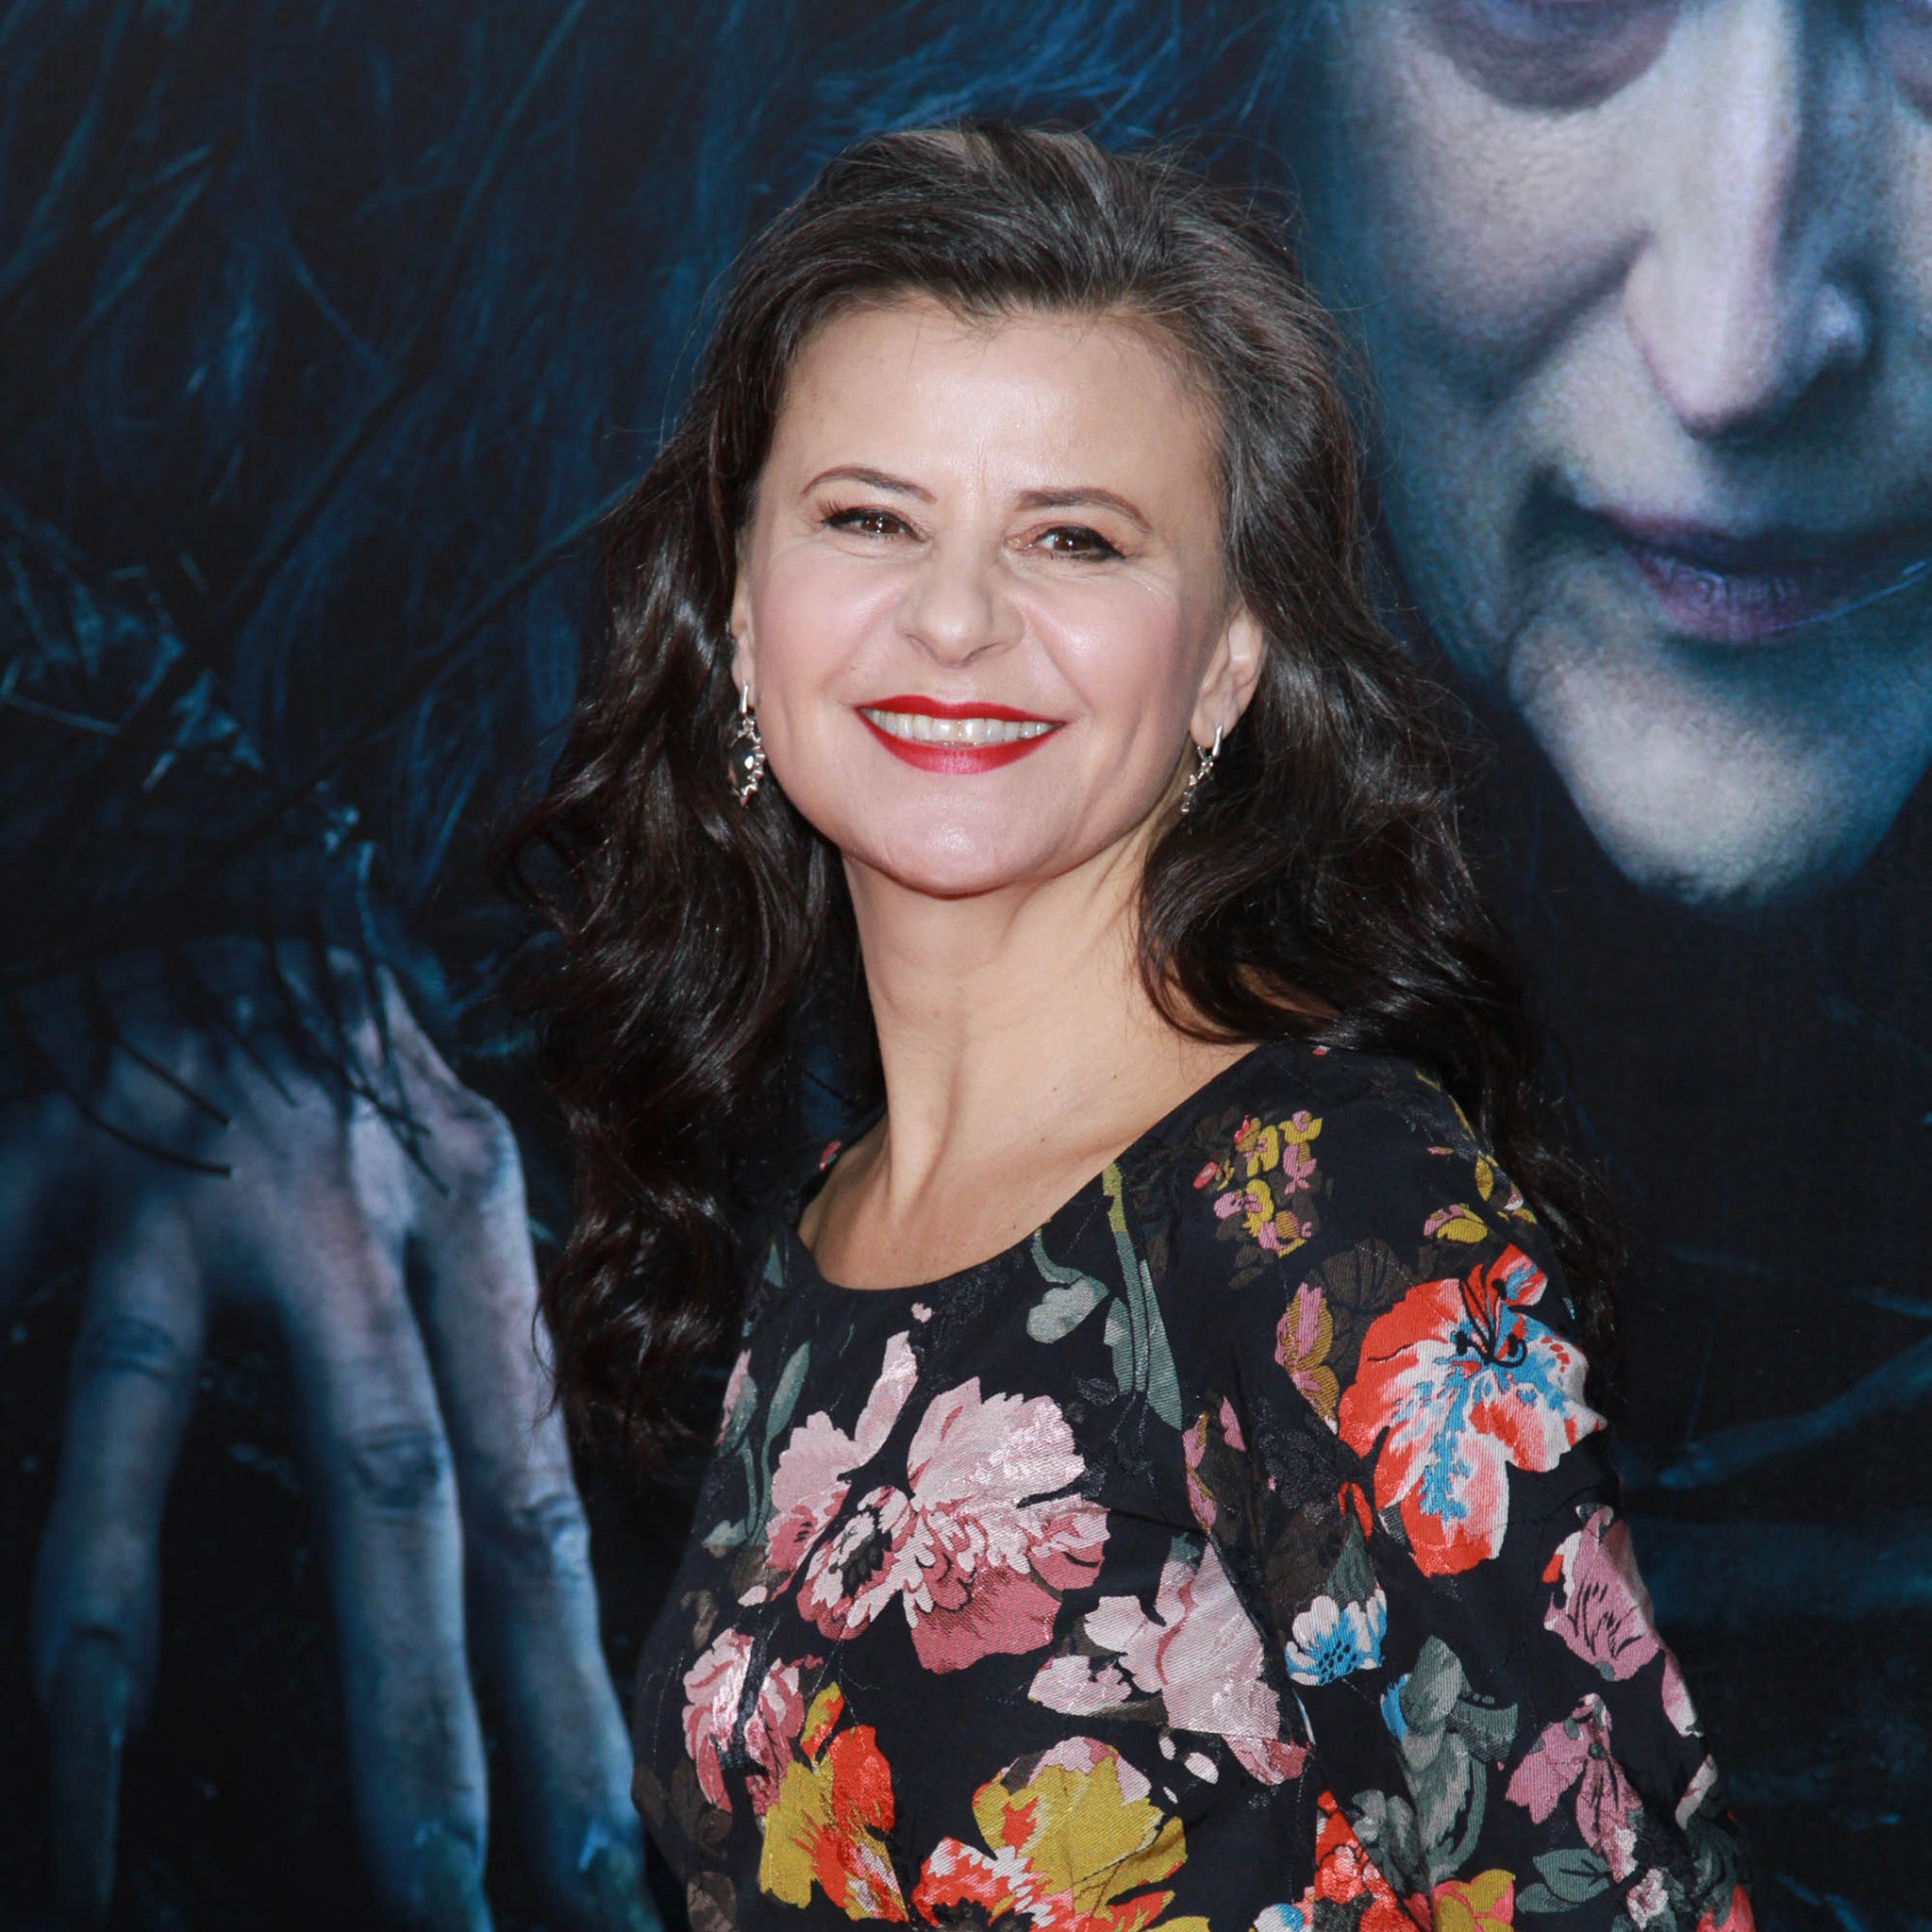 Tracey Ullman attends 'Into The Woods' World Premiere - Outside Arrivals at Ziegfeld Theater in New York